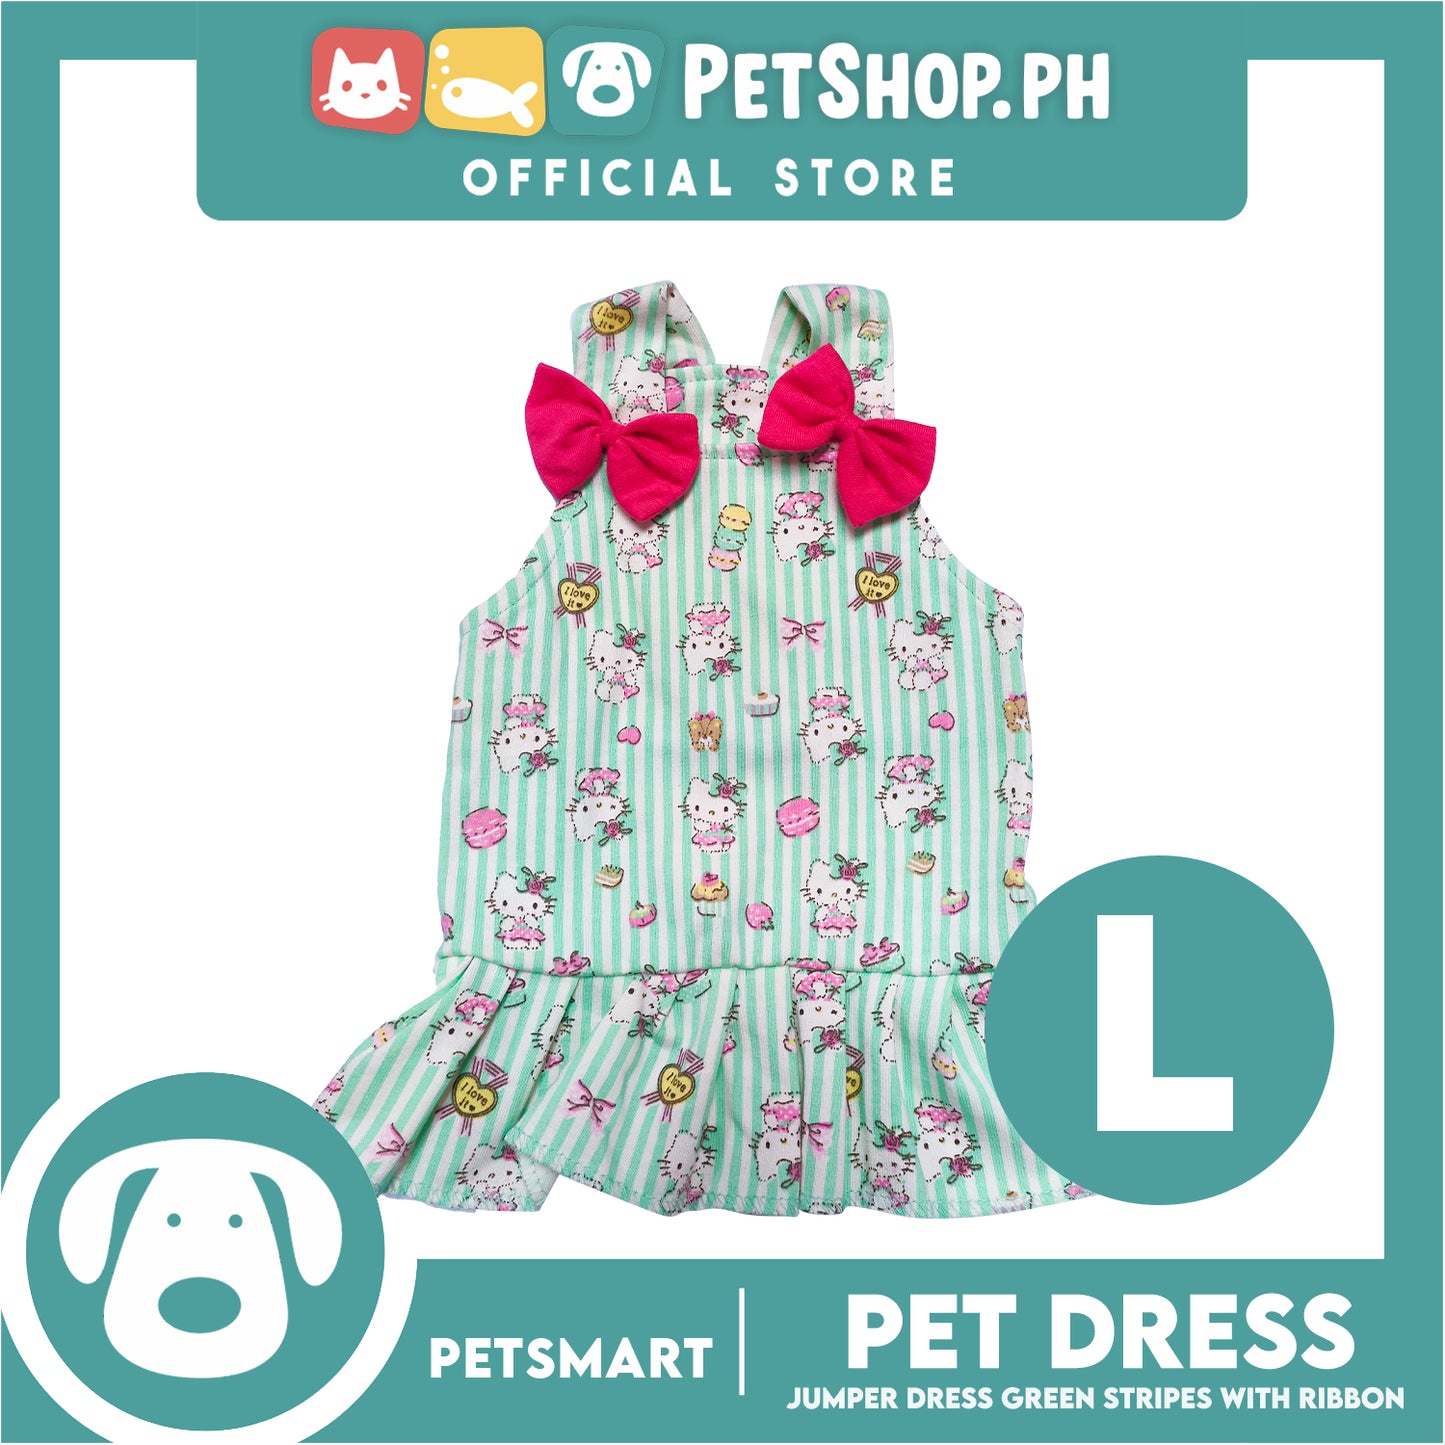 Pet Dress With Character Design, Green Stripes With Pink Ribbon (Large) Perfect Fit For Dogs And Cats, Breathable Dress, Soft Lightweight Pet Clothing